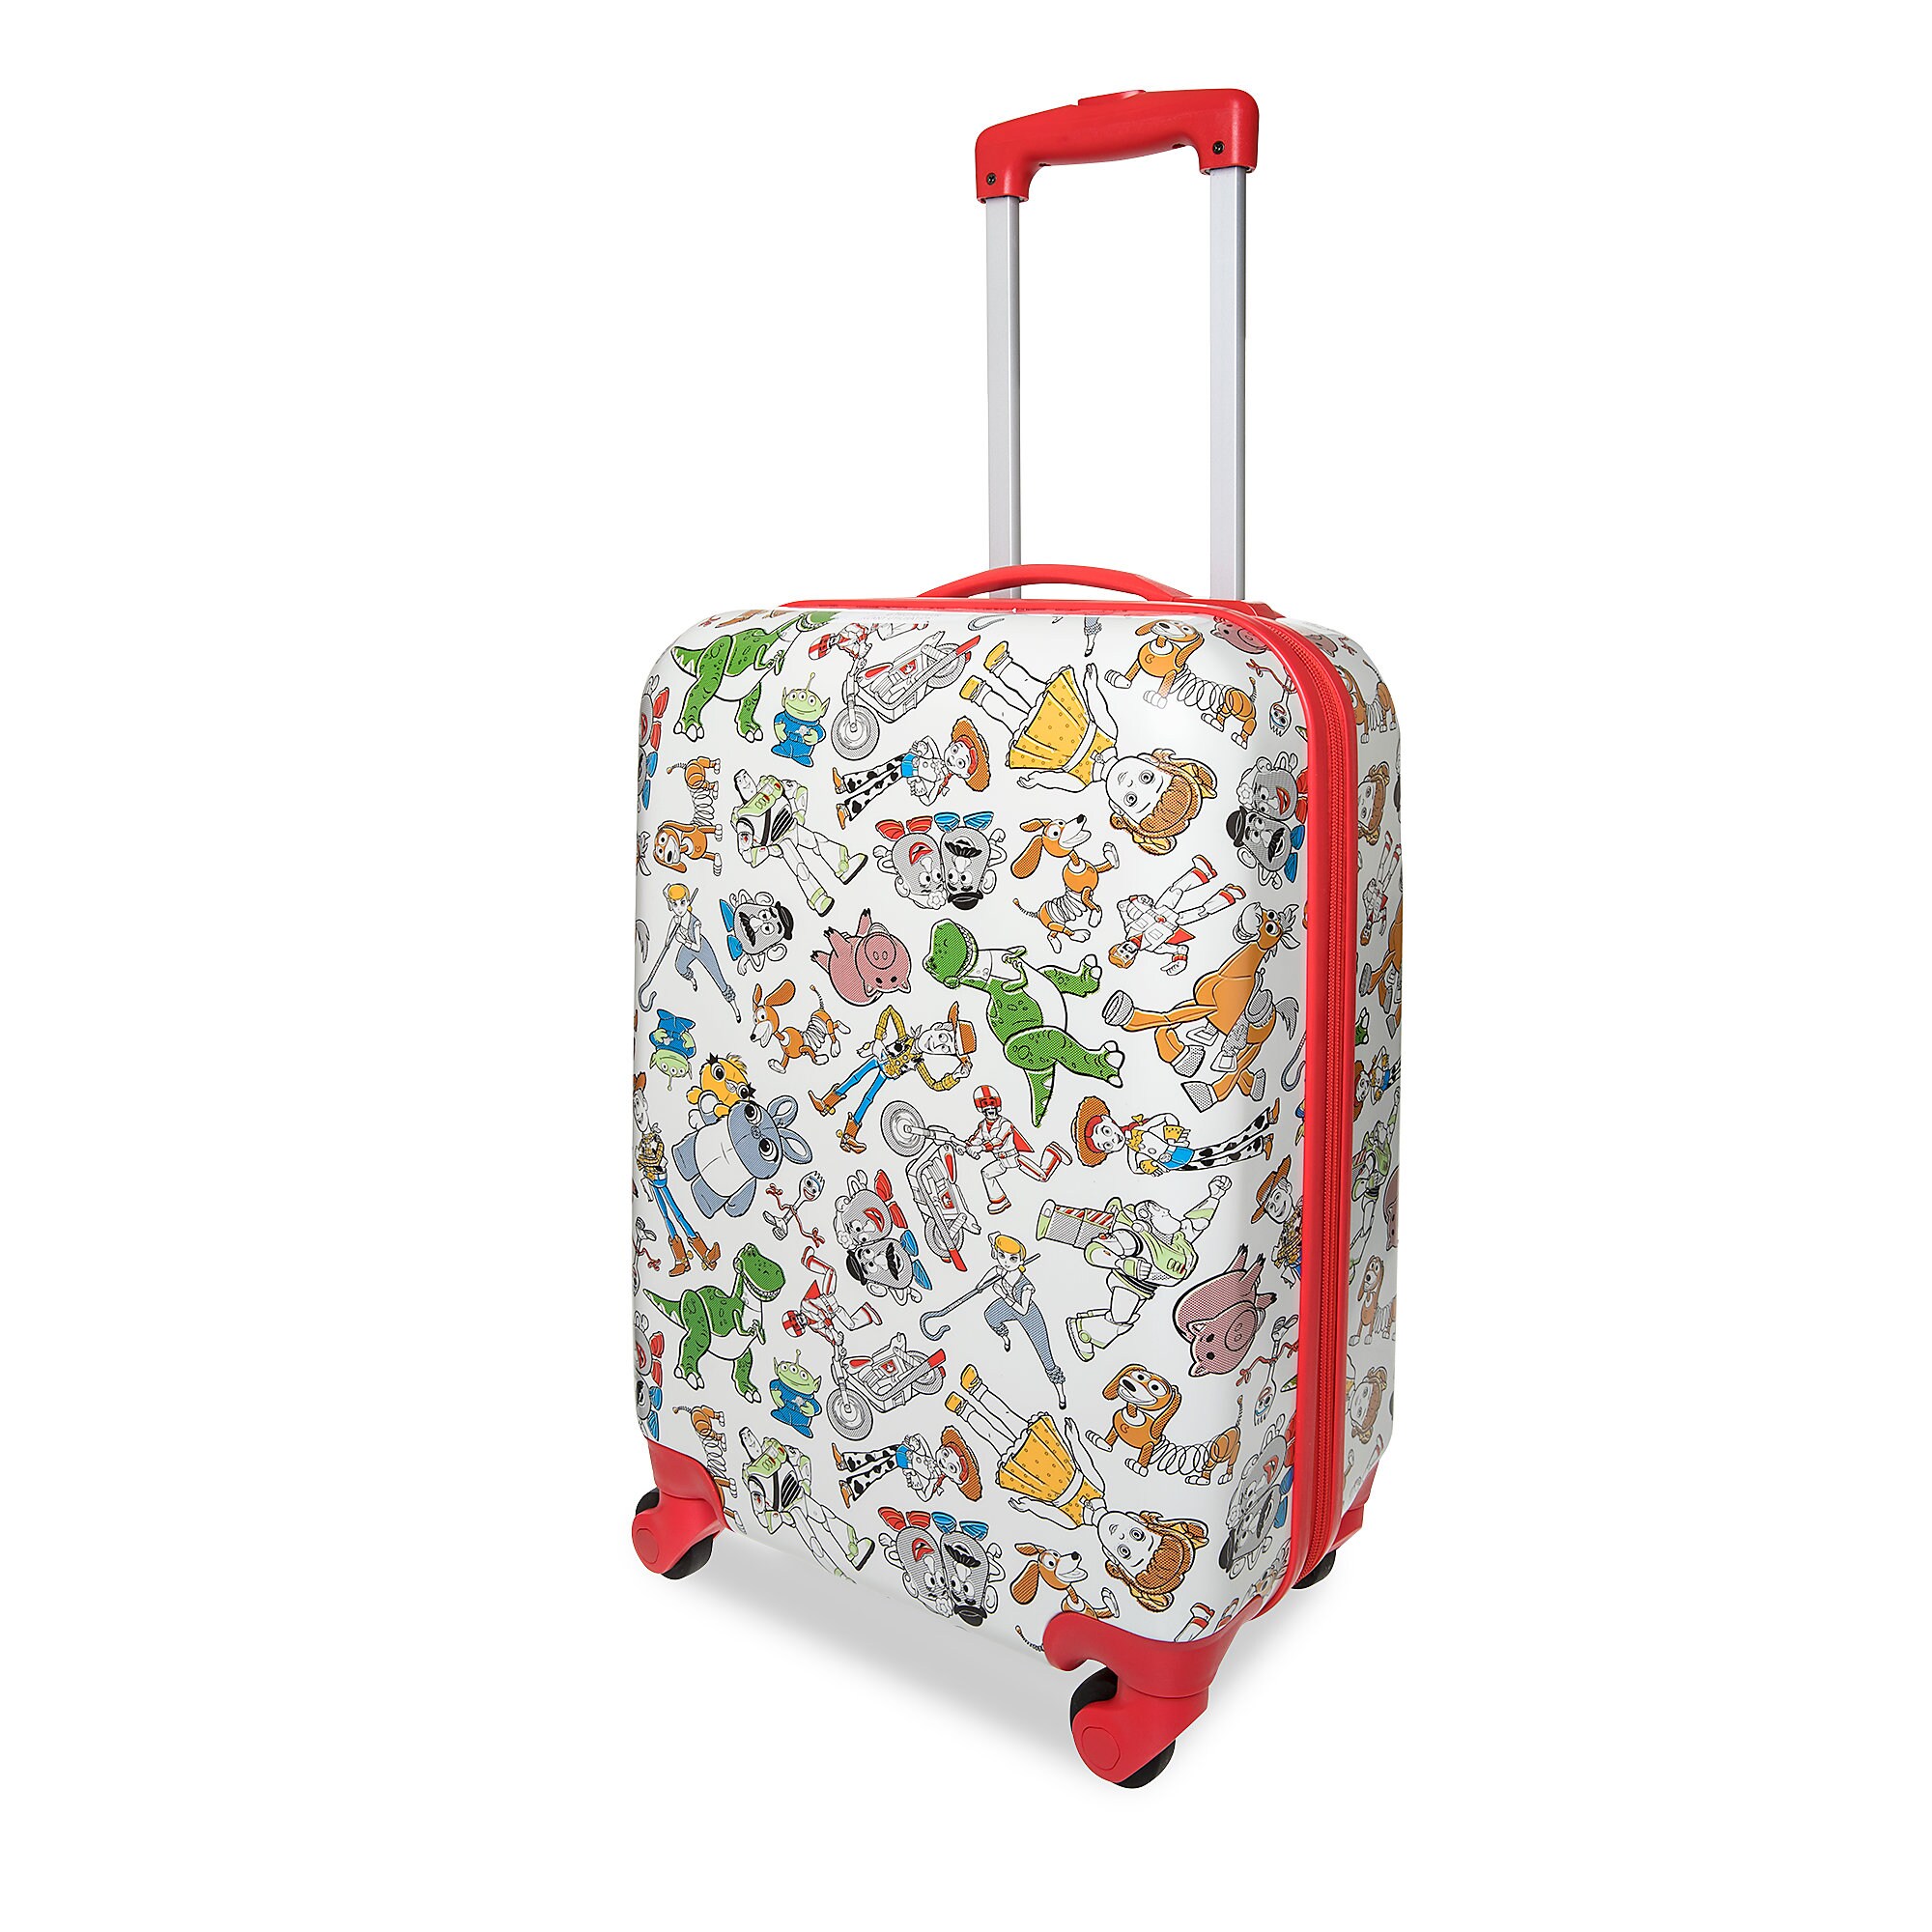 Toy Story 4 Rolling Luggage - Small